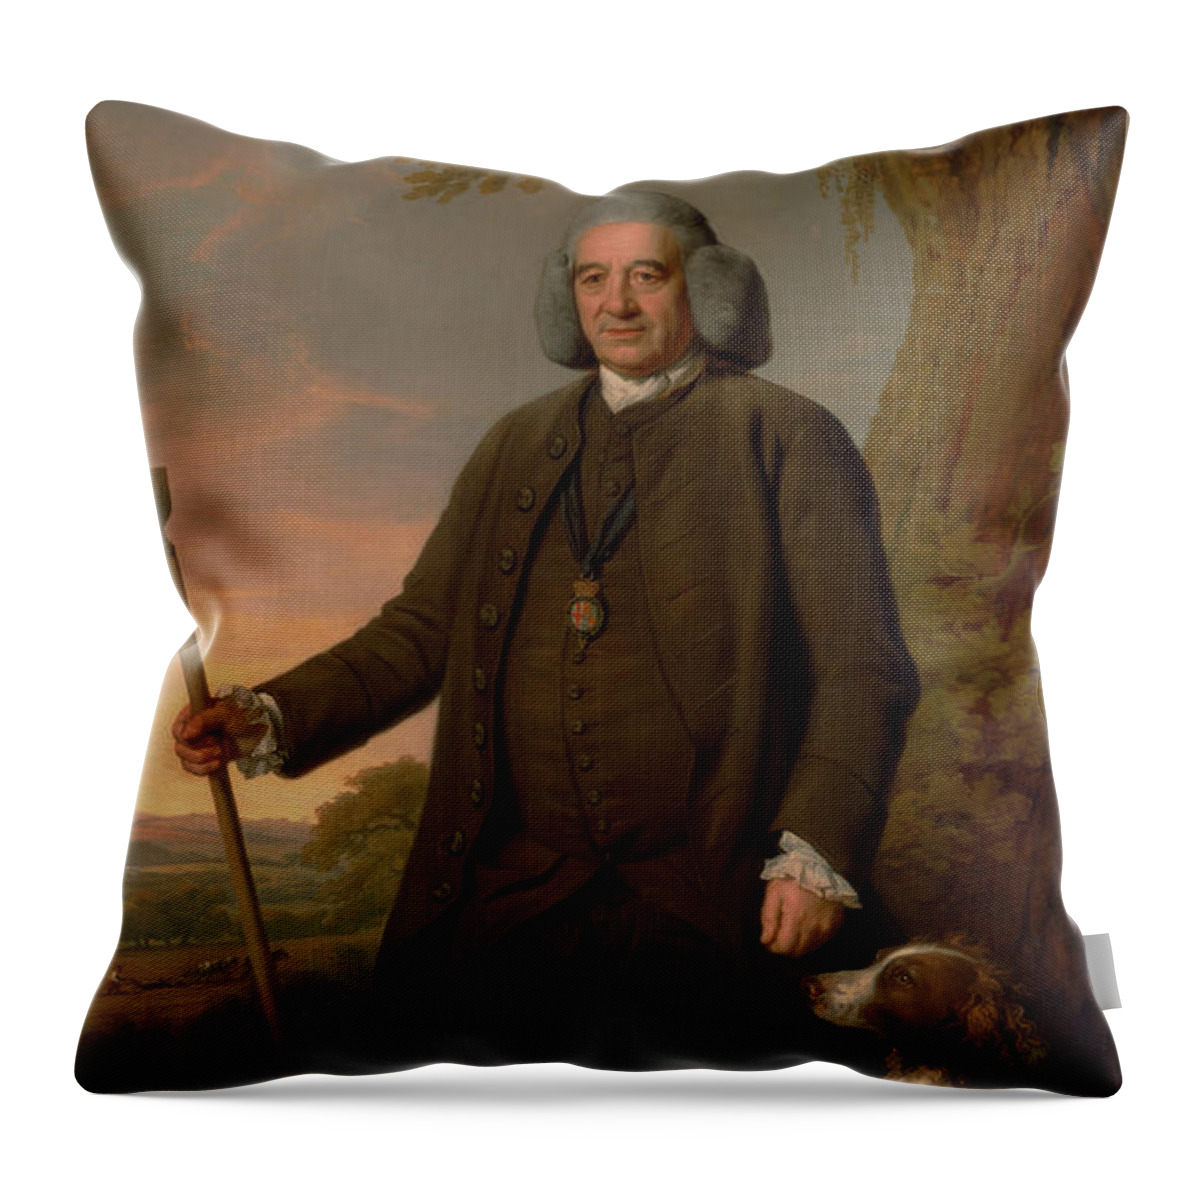 18th Century Art Throw Pillow featuring the painting Thomas Sense Browne by Nathaniel Dance-Holland